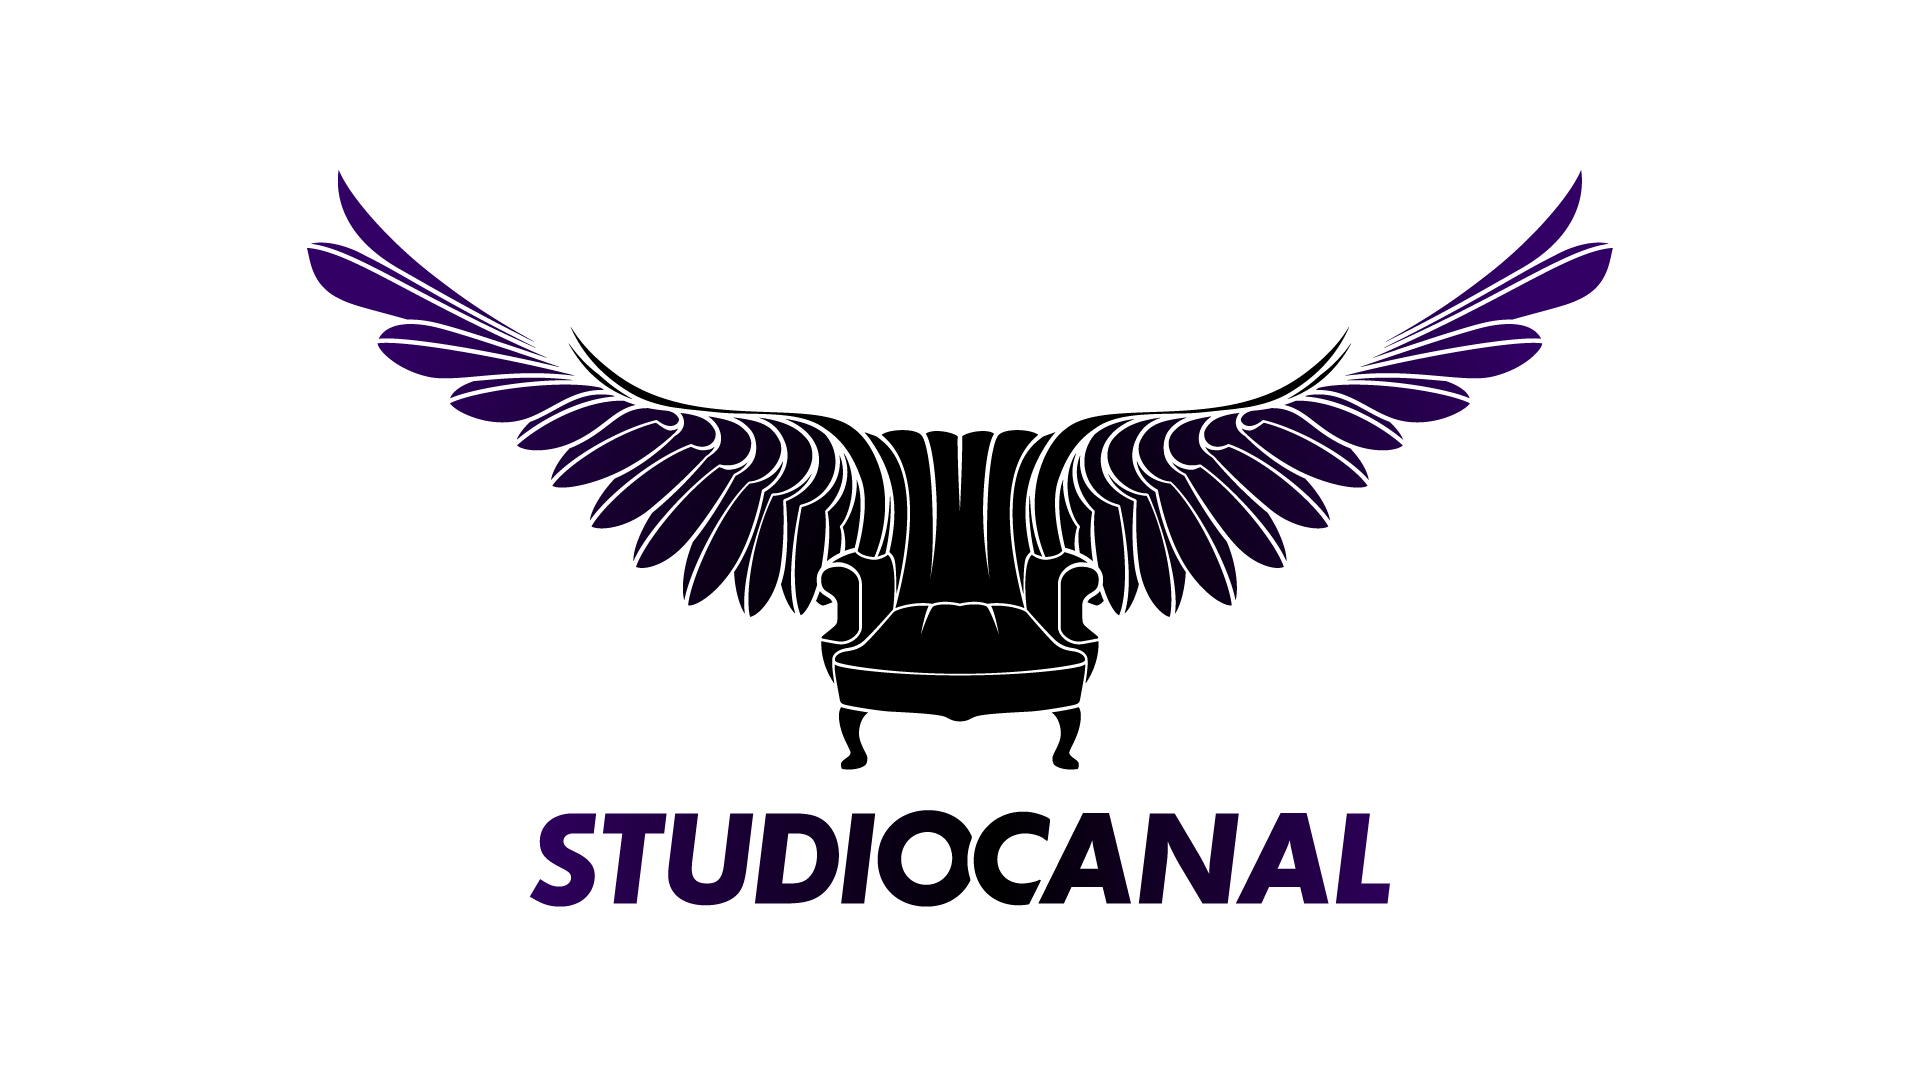 Logo: A chair with wings for Studiocanal